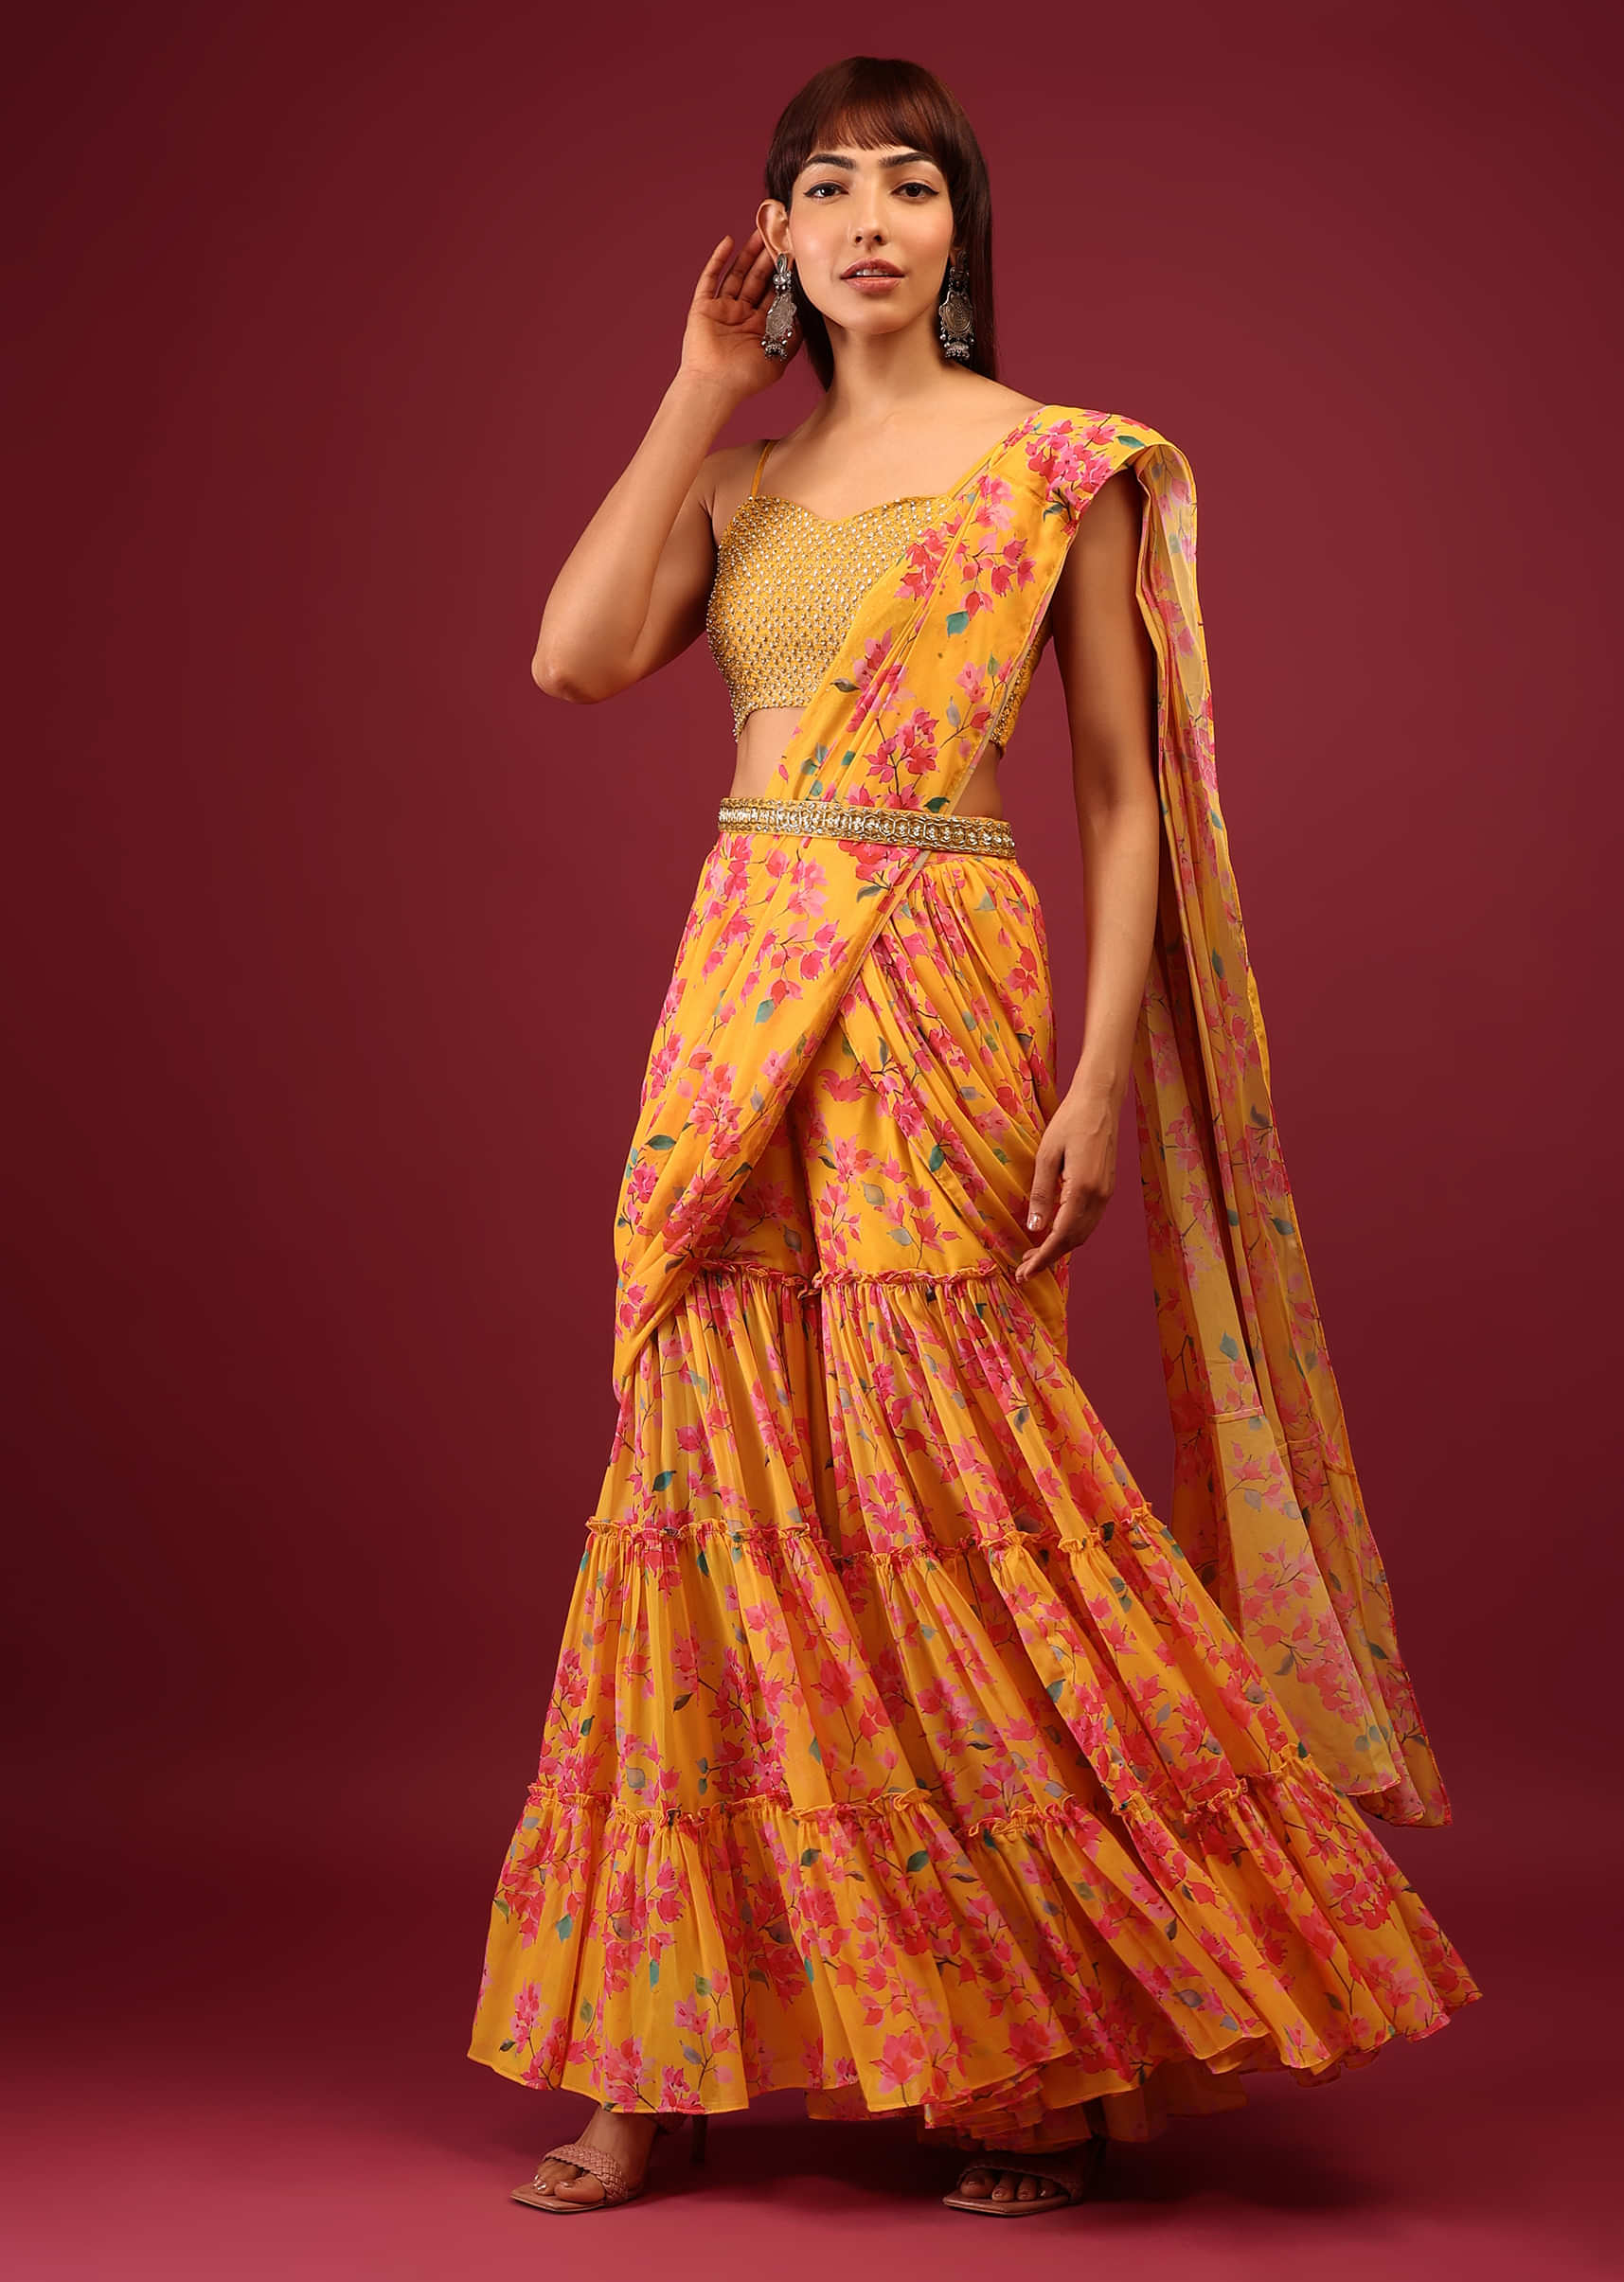 Chrome Yellow Floral Print Sharara Saree With Attached Pallu And Embroidered Blouse